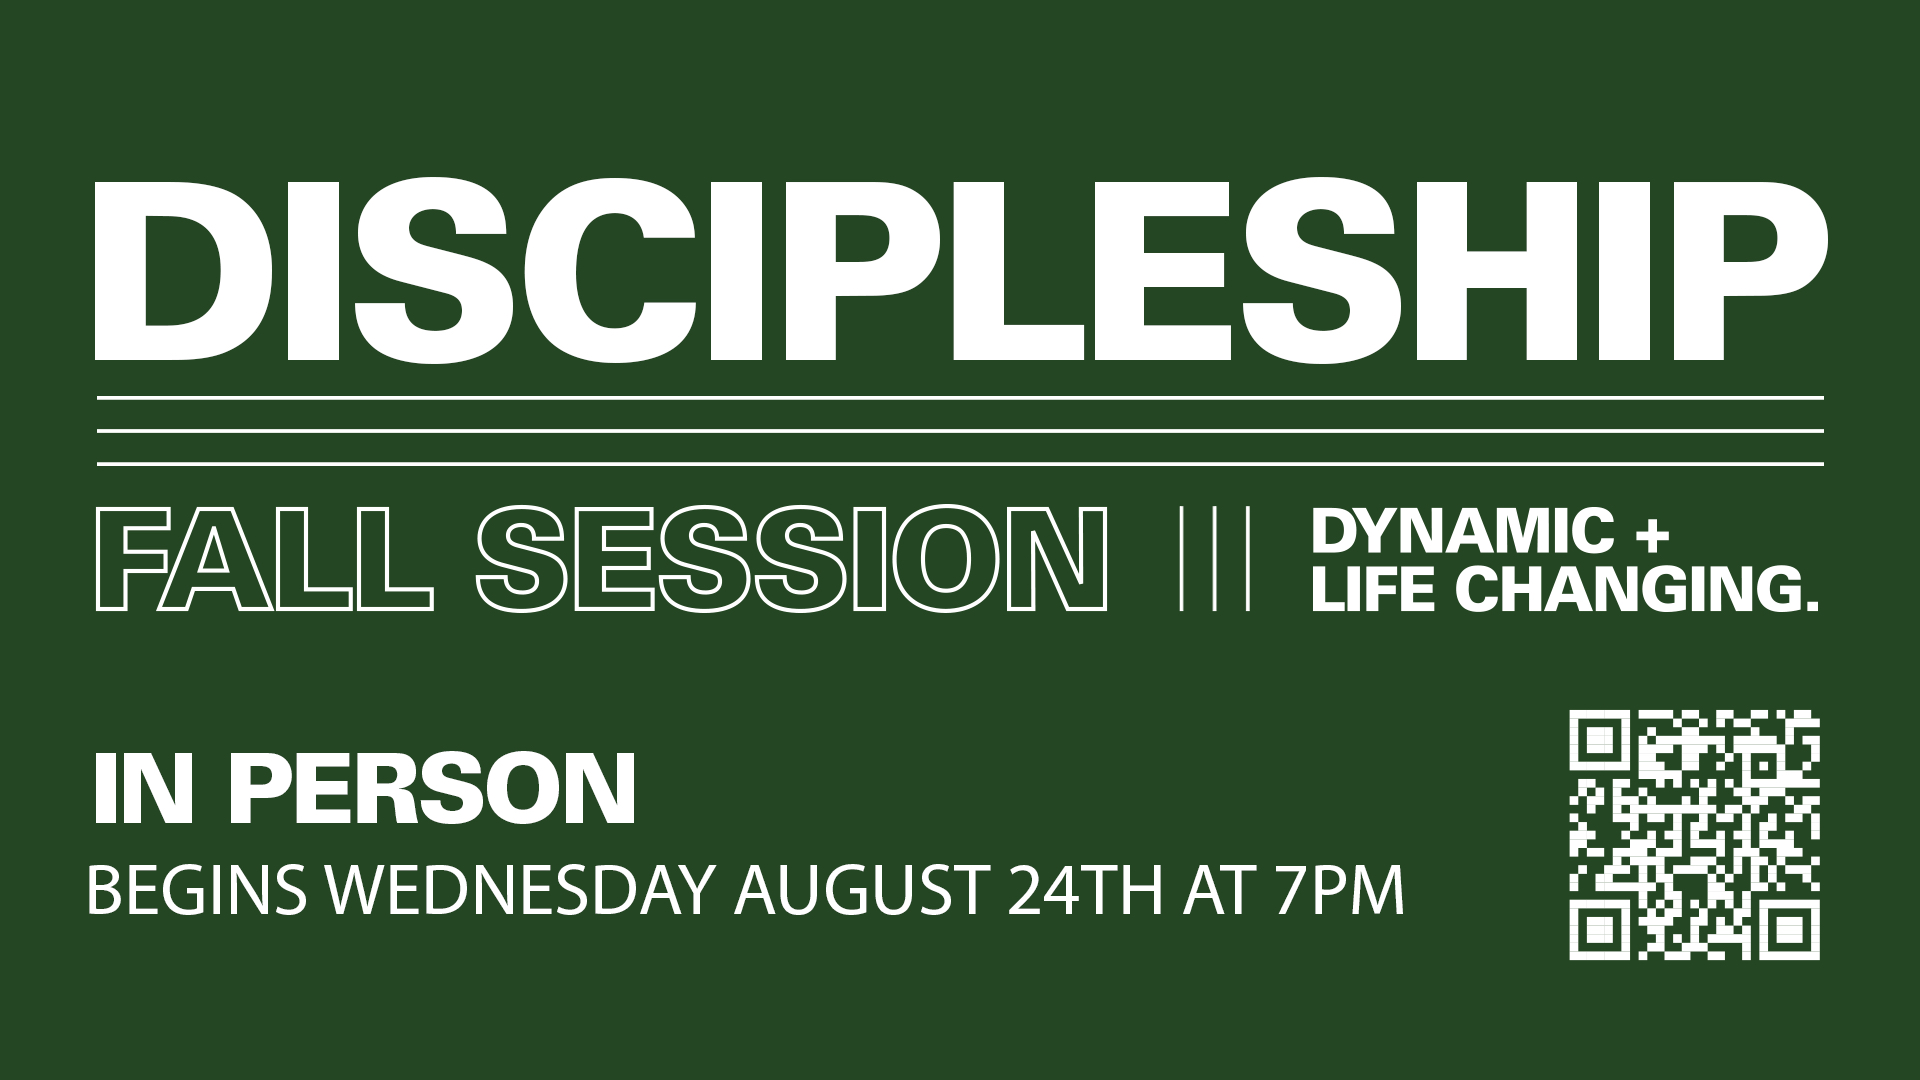 School of Discipleship - Fall Session at the Cumming campus